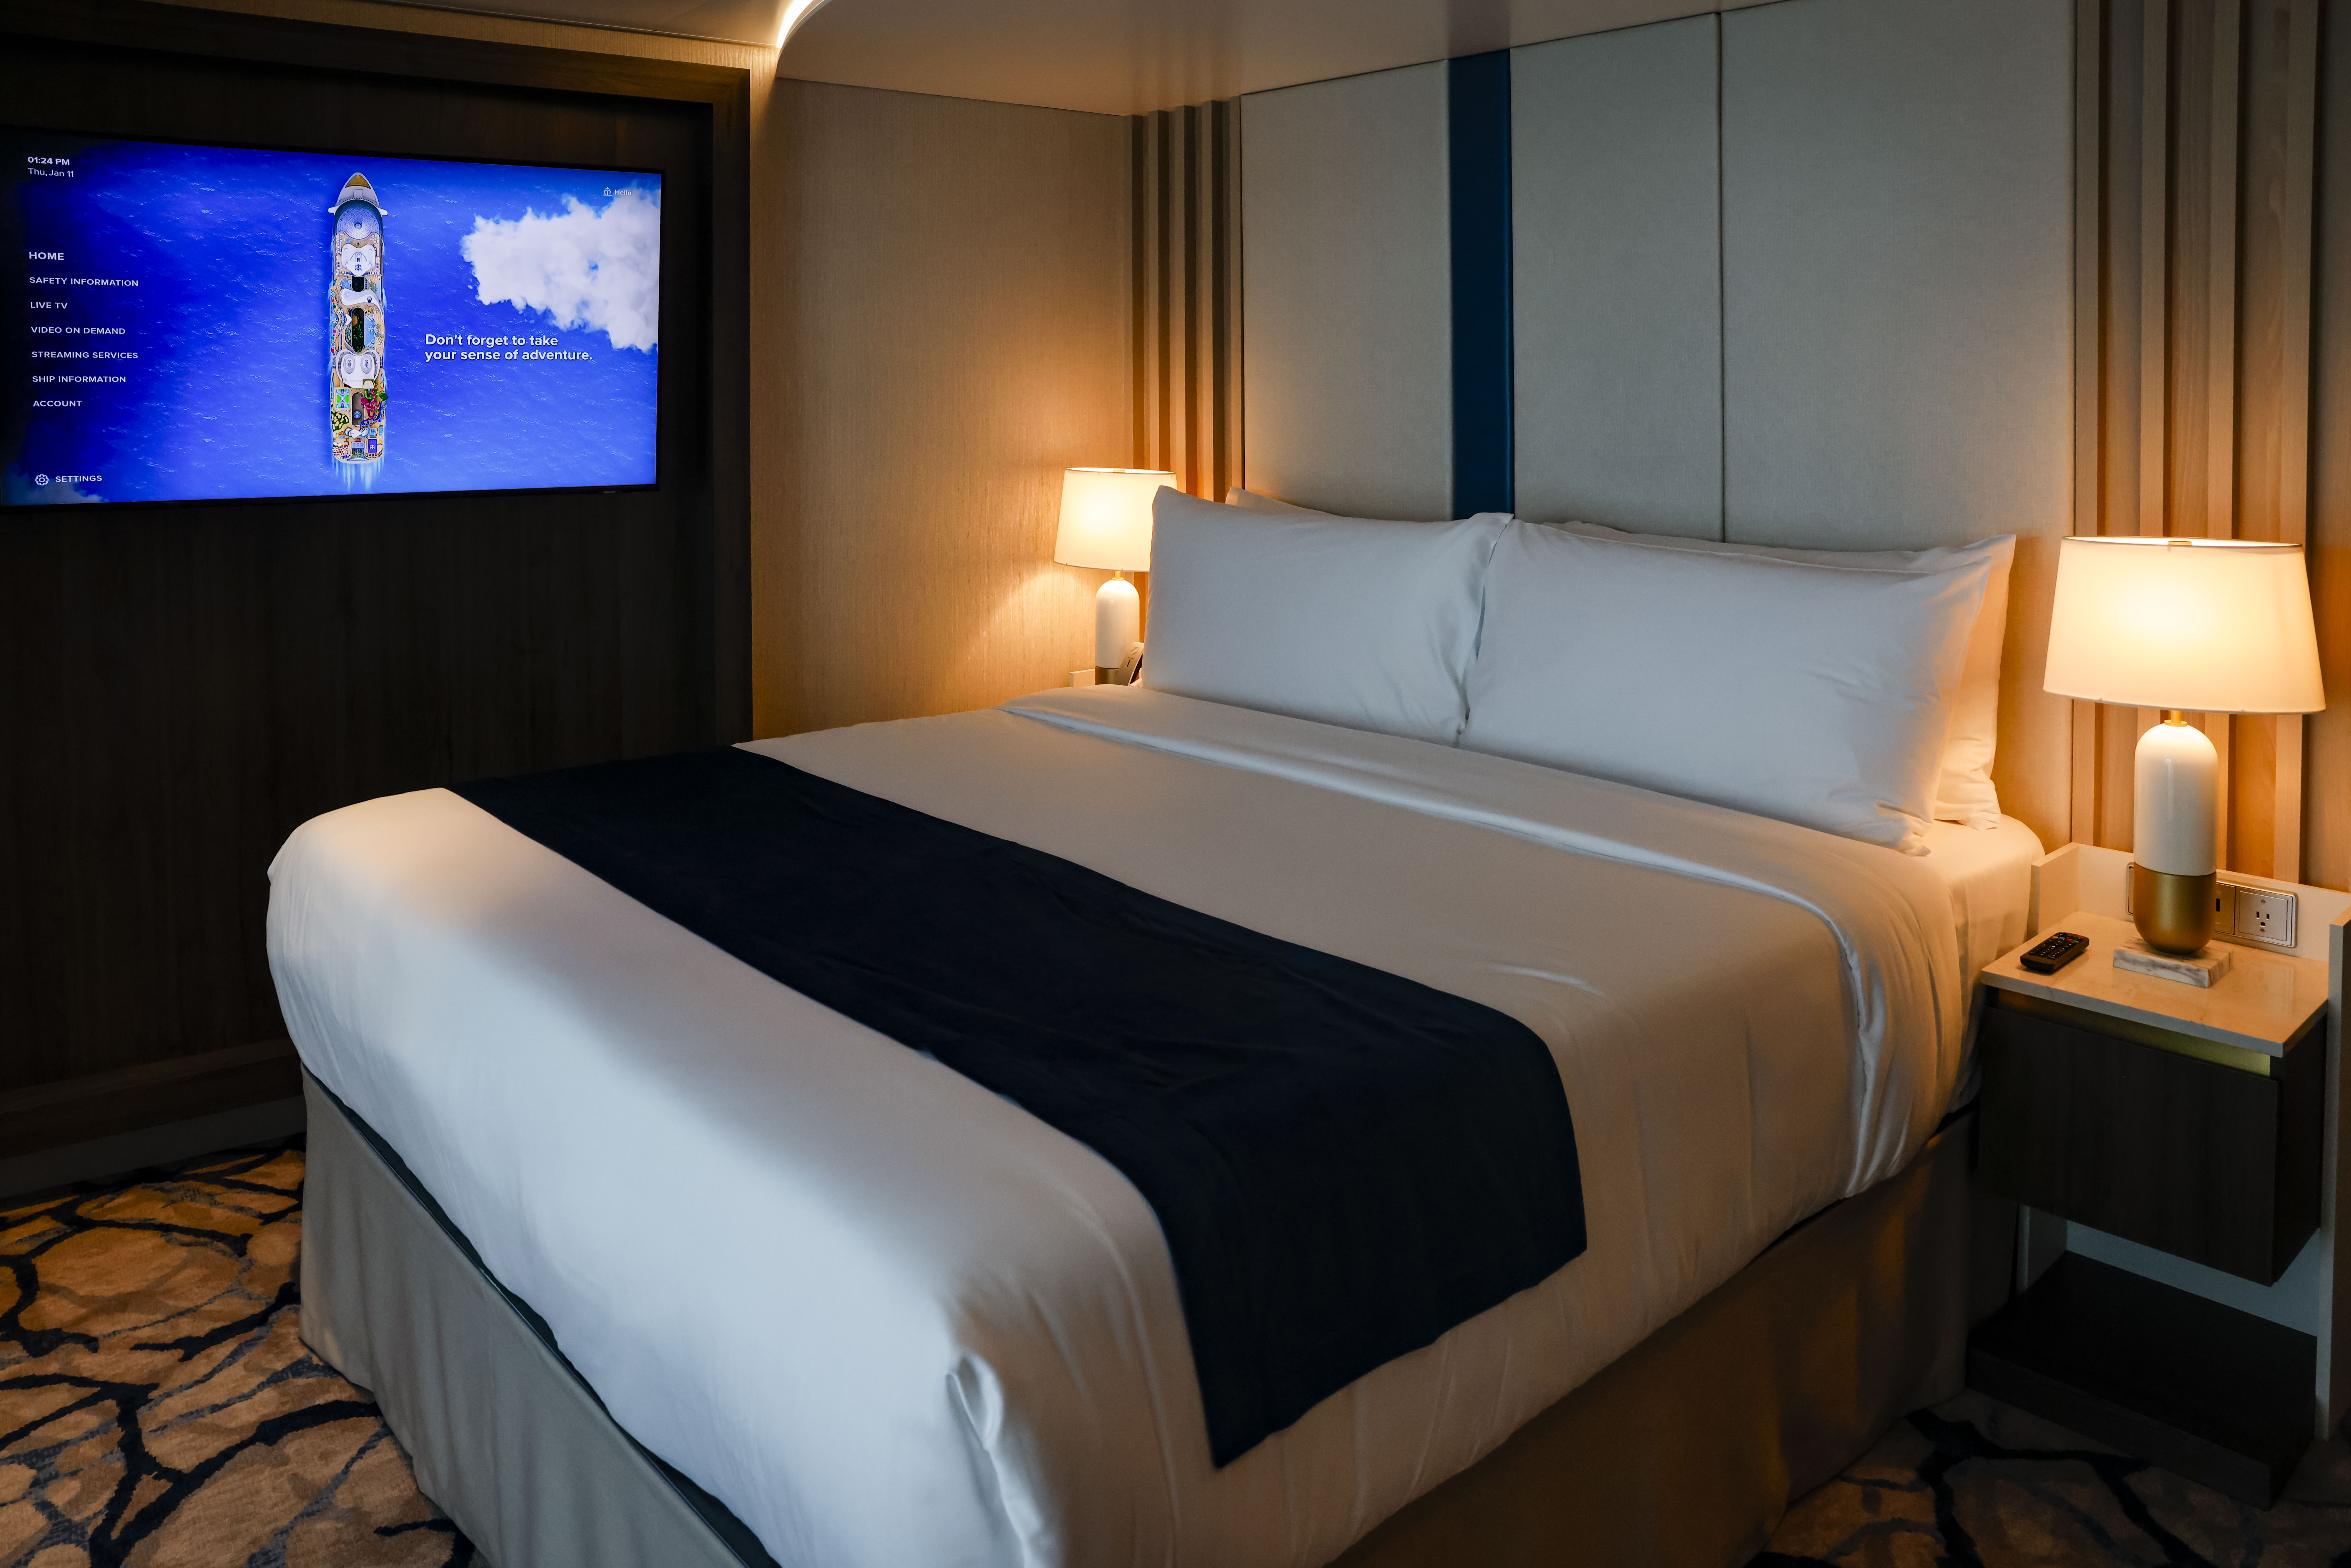 Guests will have comfortable rooms